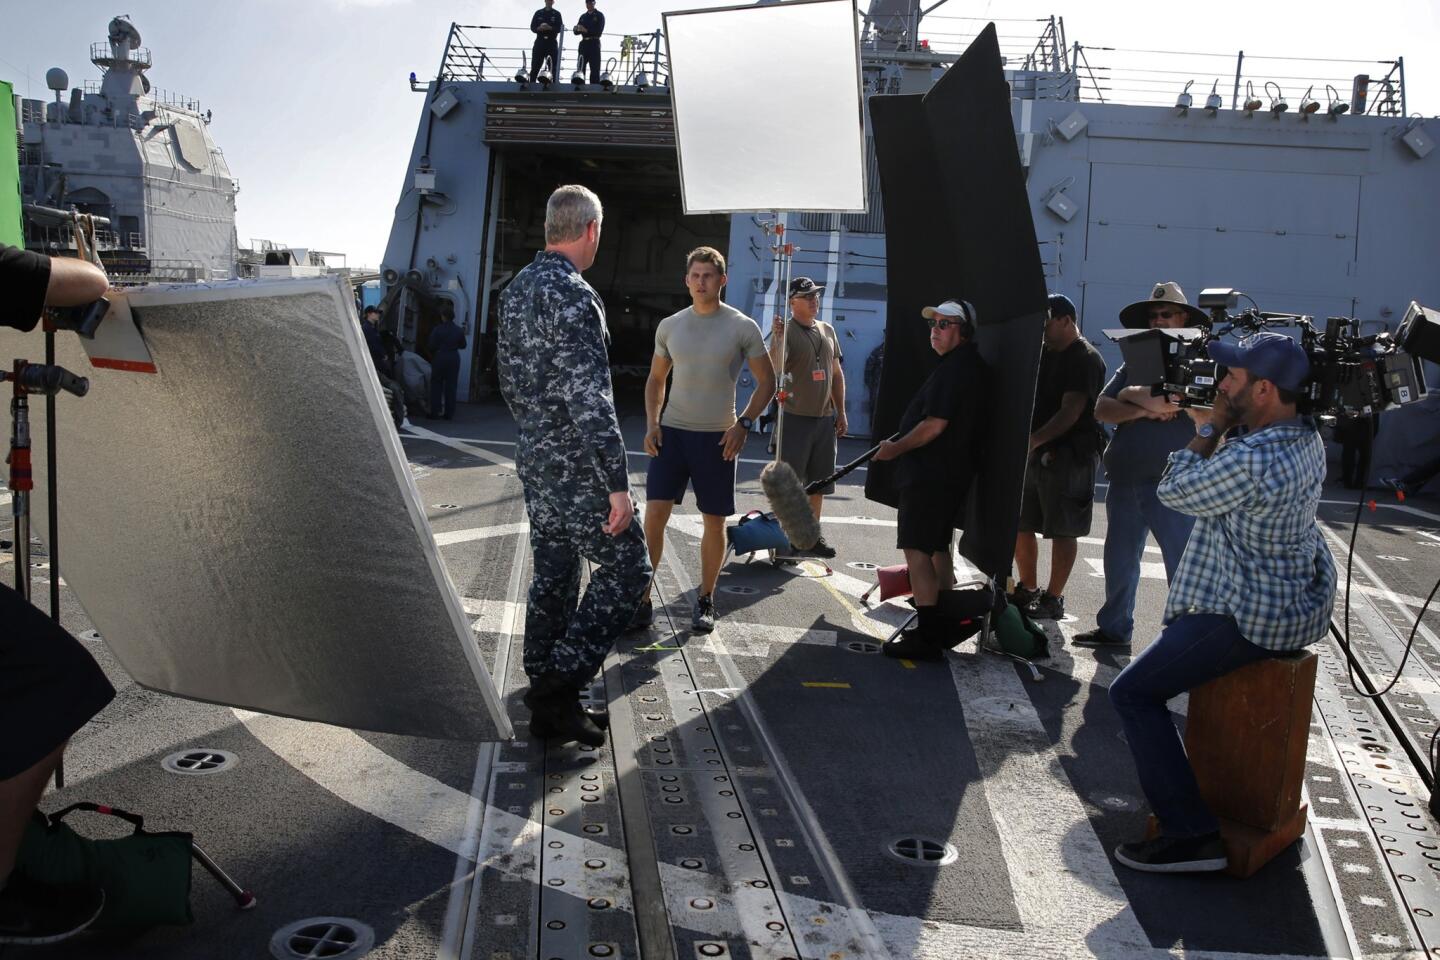 The Last Ship' on TNT is packed with U.S. Navy firepower - Los Angeles Times